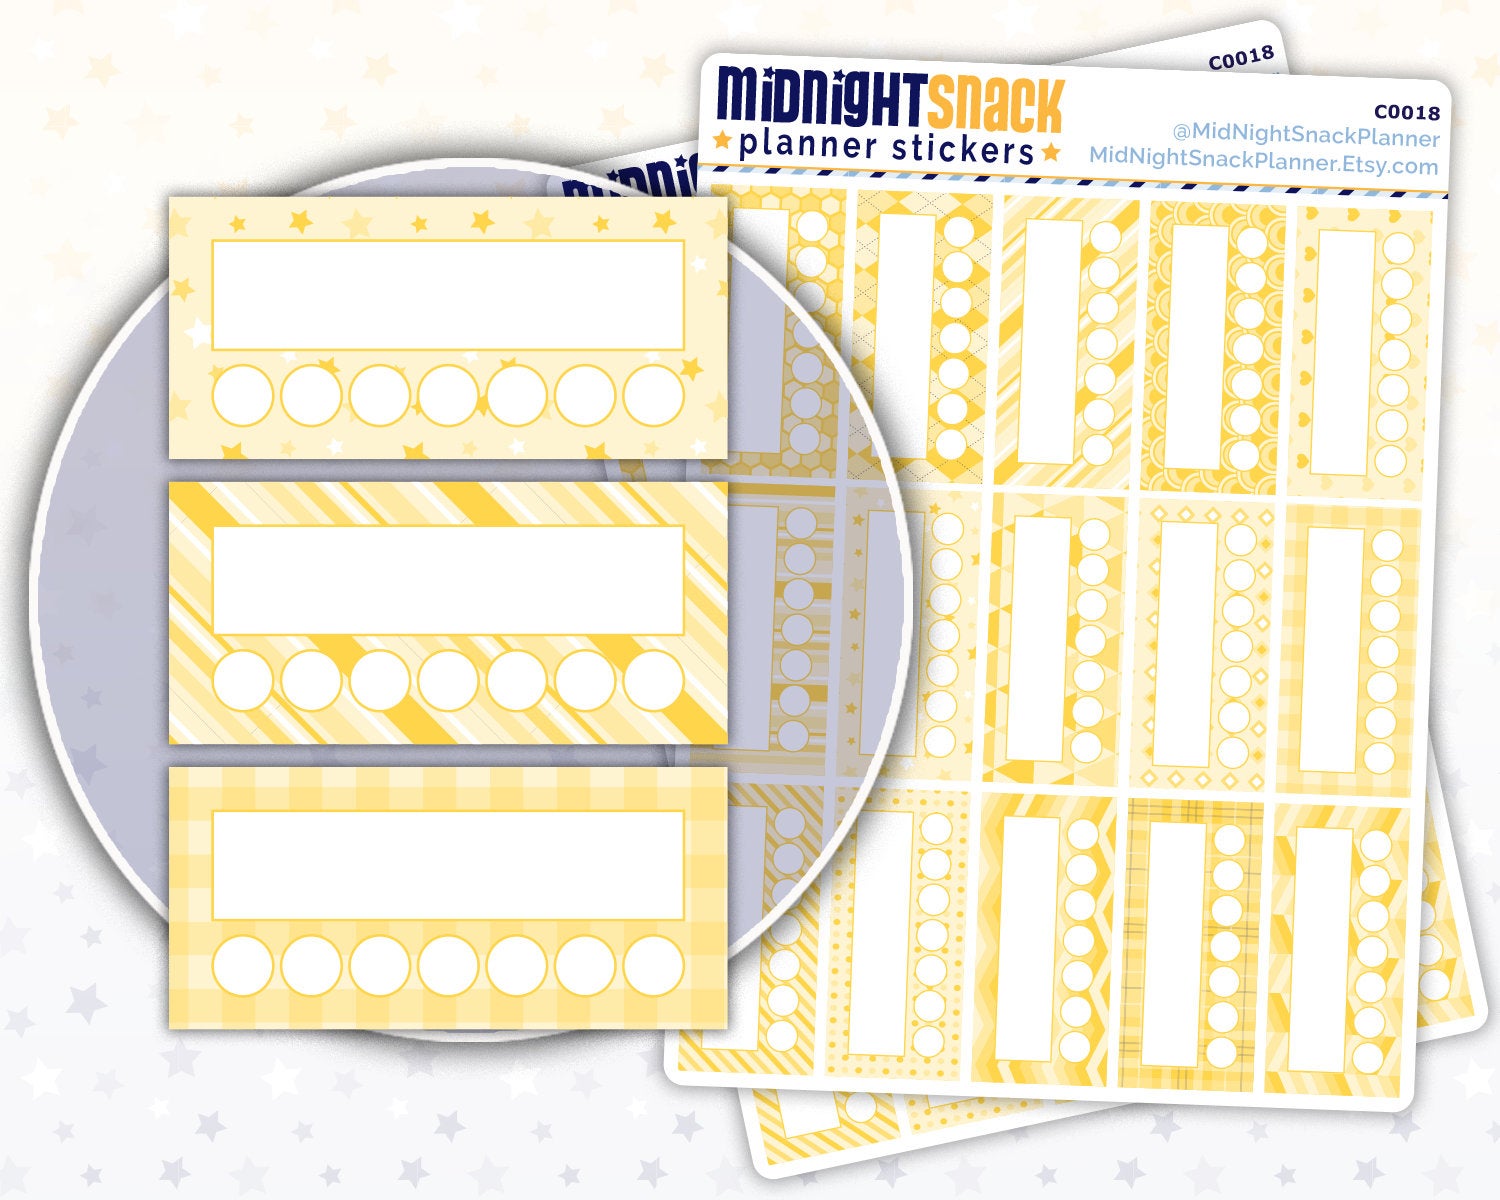 Yellow Patterned Habit Tracker Planner Stickers Midnight Snack Planner